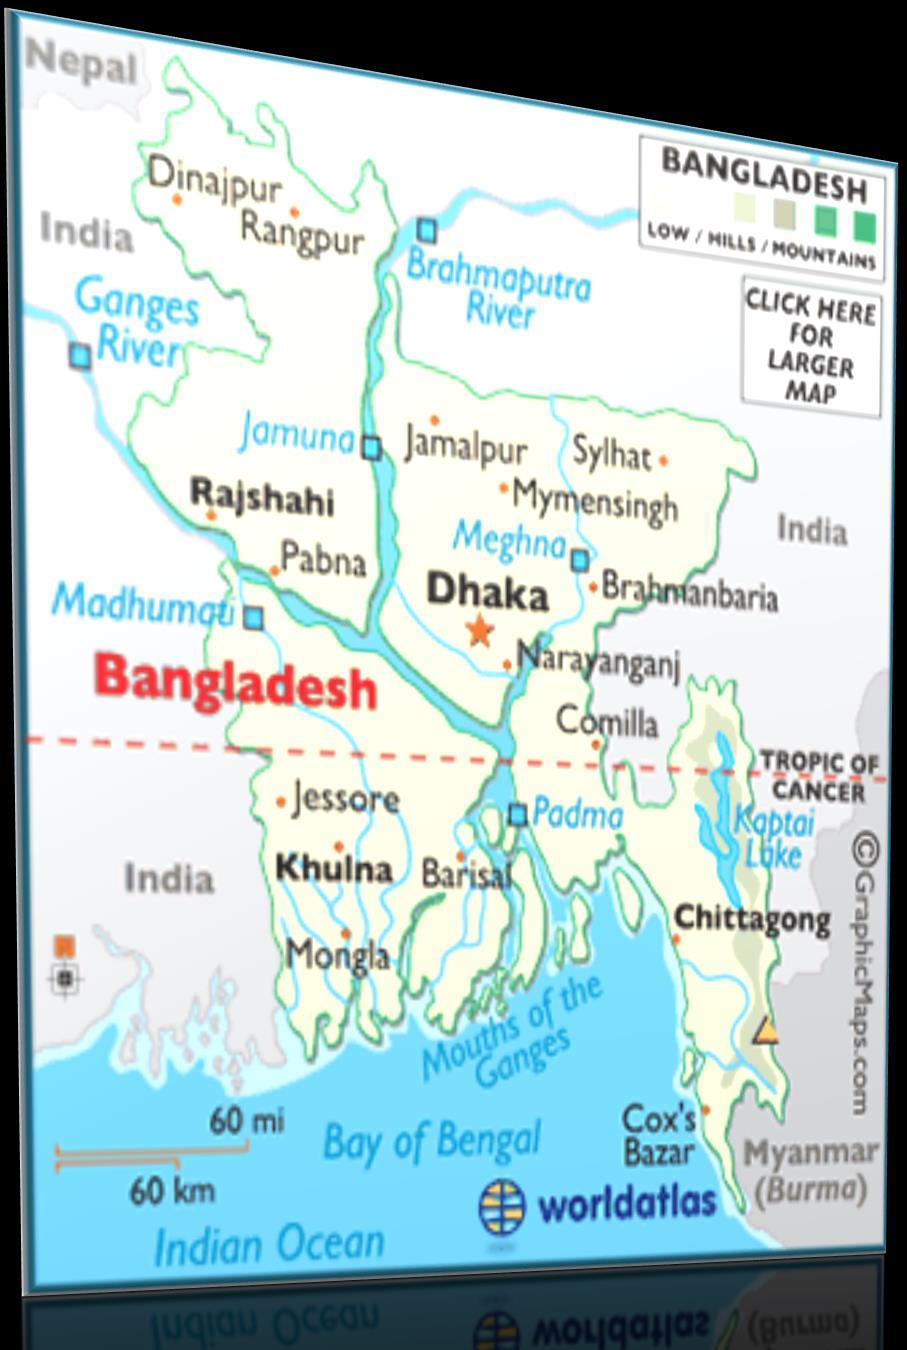 Existing Port Sector in Bangladesh Chittagong: Main gateway port handles 92% of sea borne cargo and 97% of container